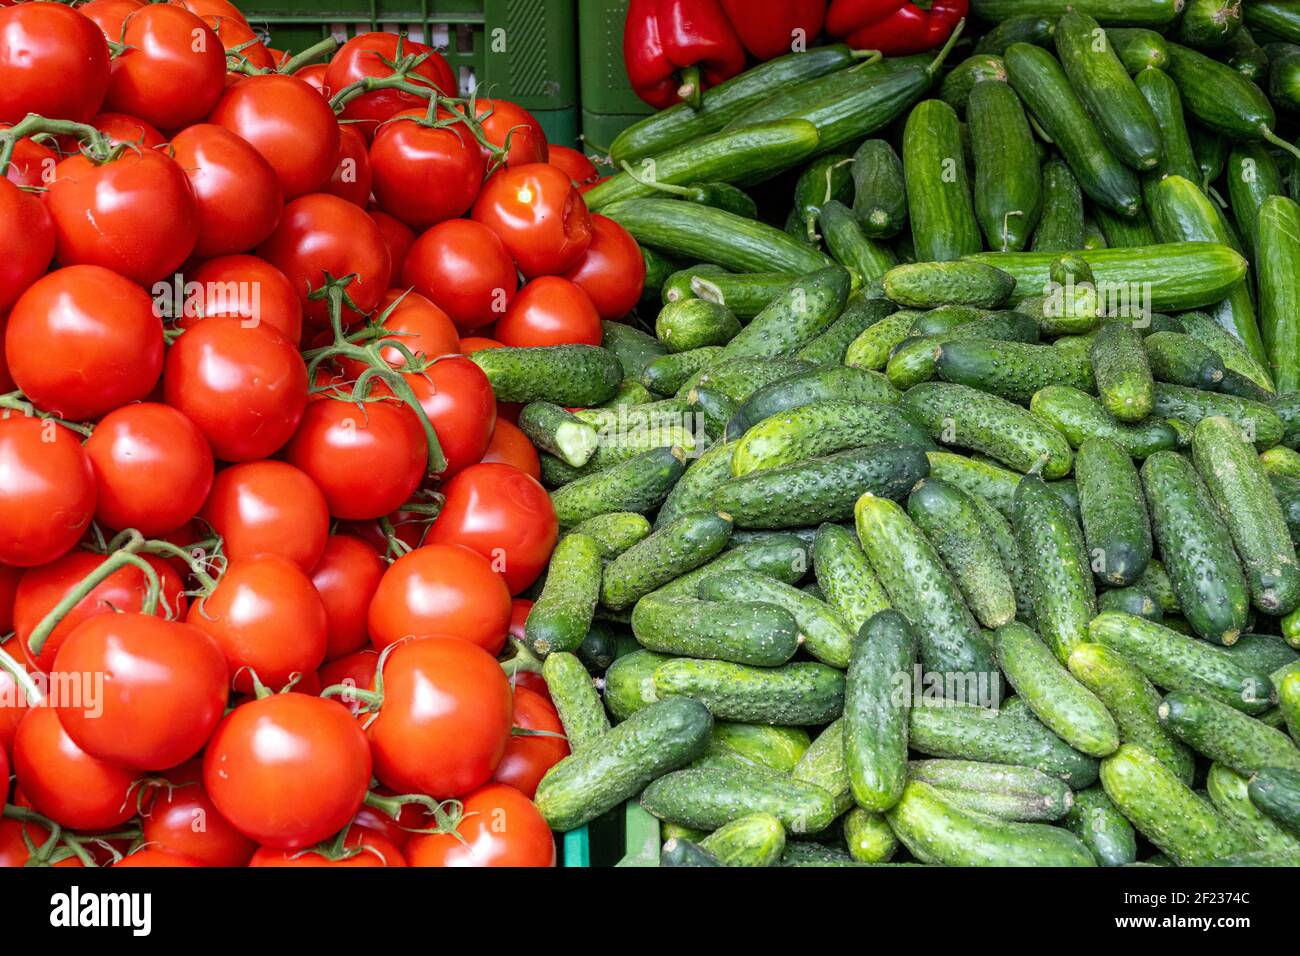 Pickles and tomatoes for sale at a market Stock Photo